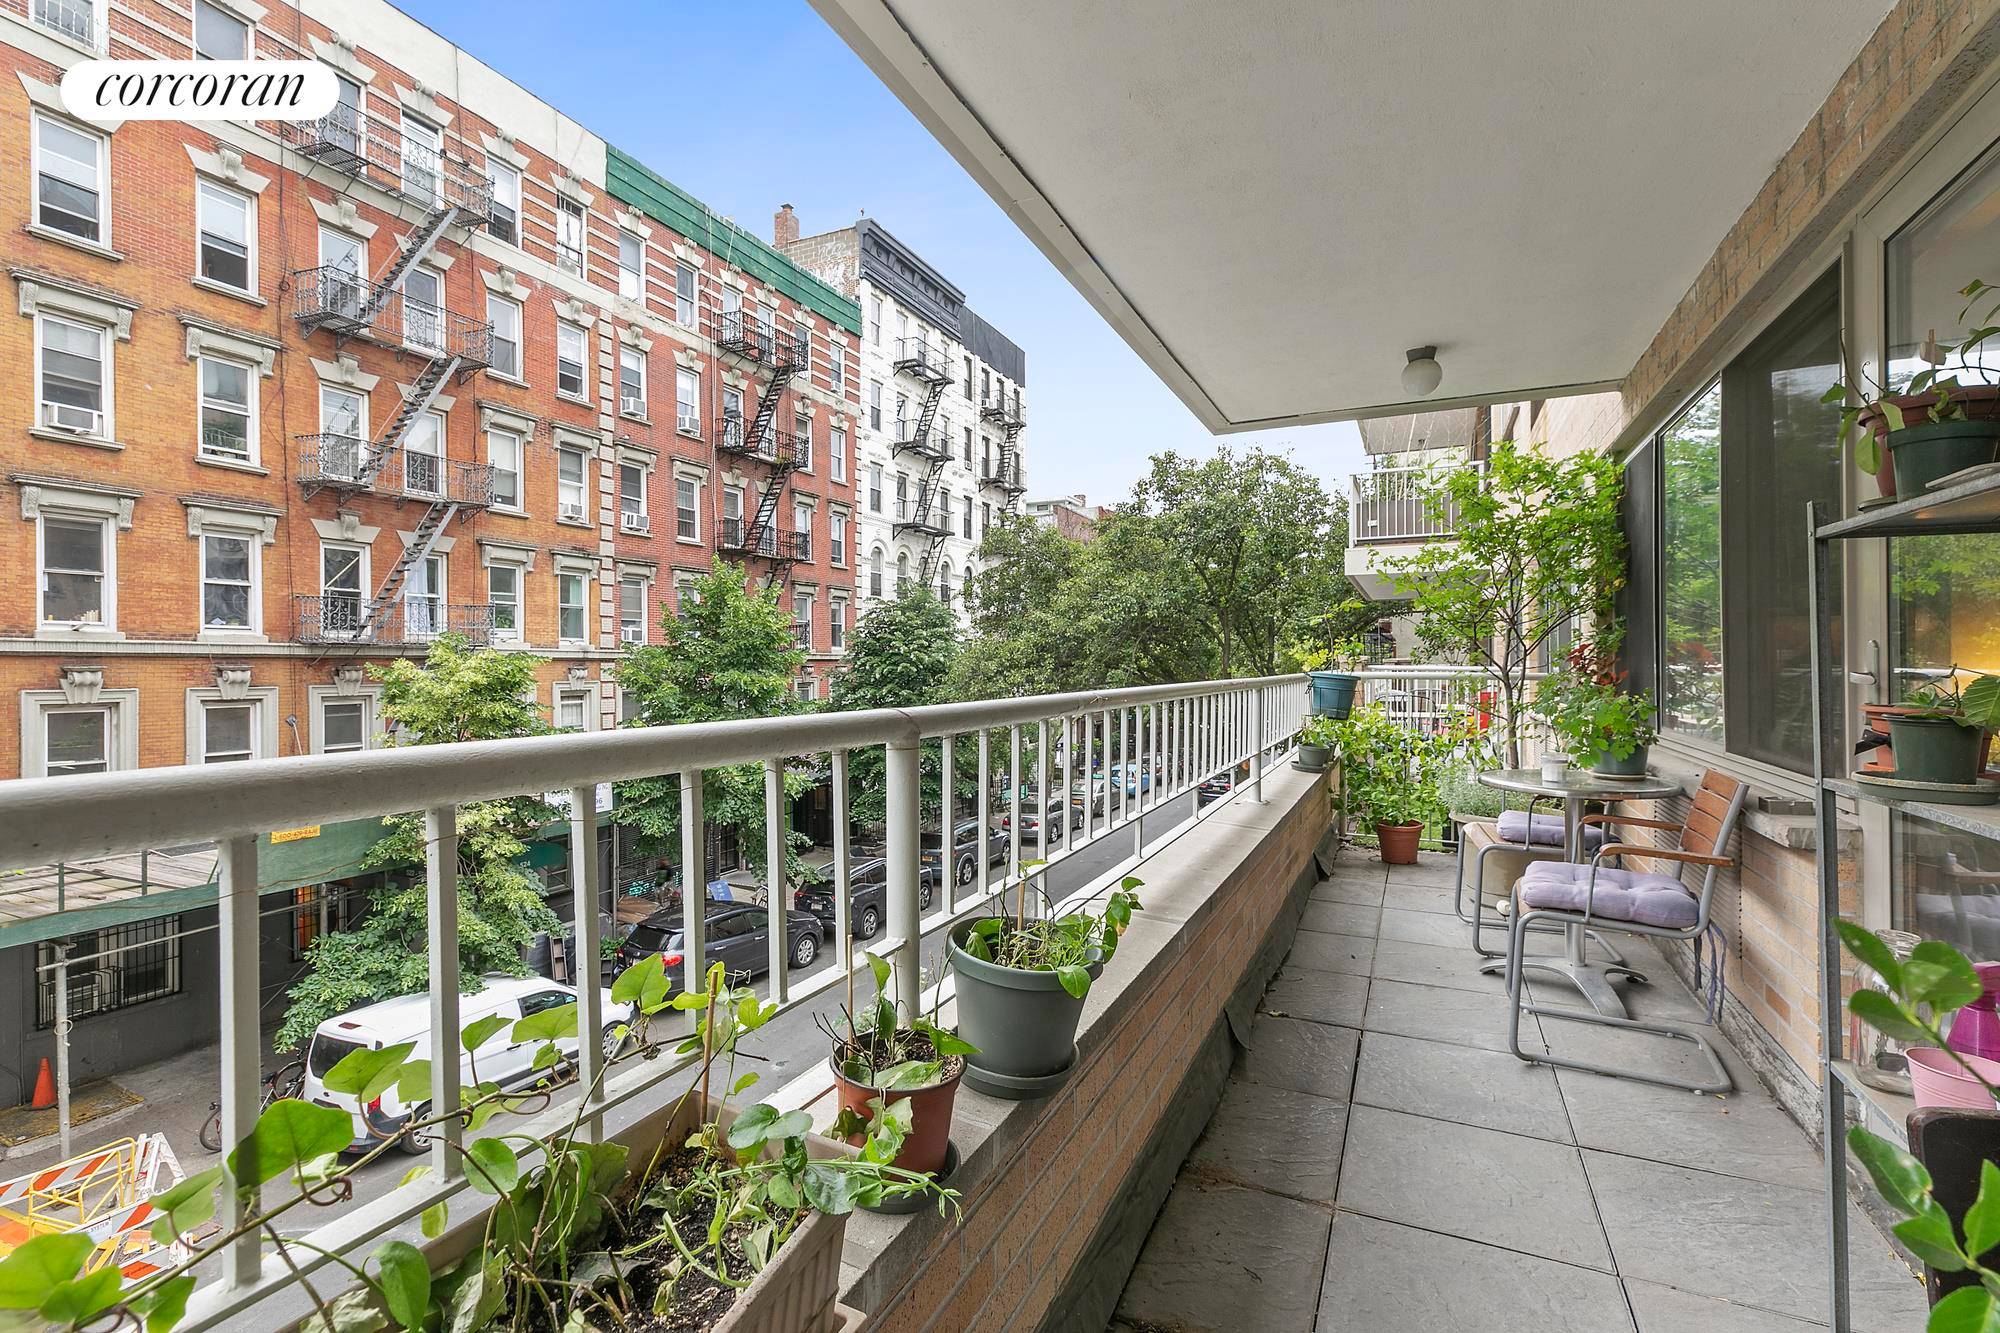 FULLY FURNISHED FOR ONE YEAR LEASECONDO APPLICATION REQUIREDJULY 1 MOVE INThis Bright south facing one bedroom apartment with an enormous outdoor space is your new East Village home !